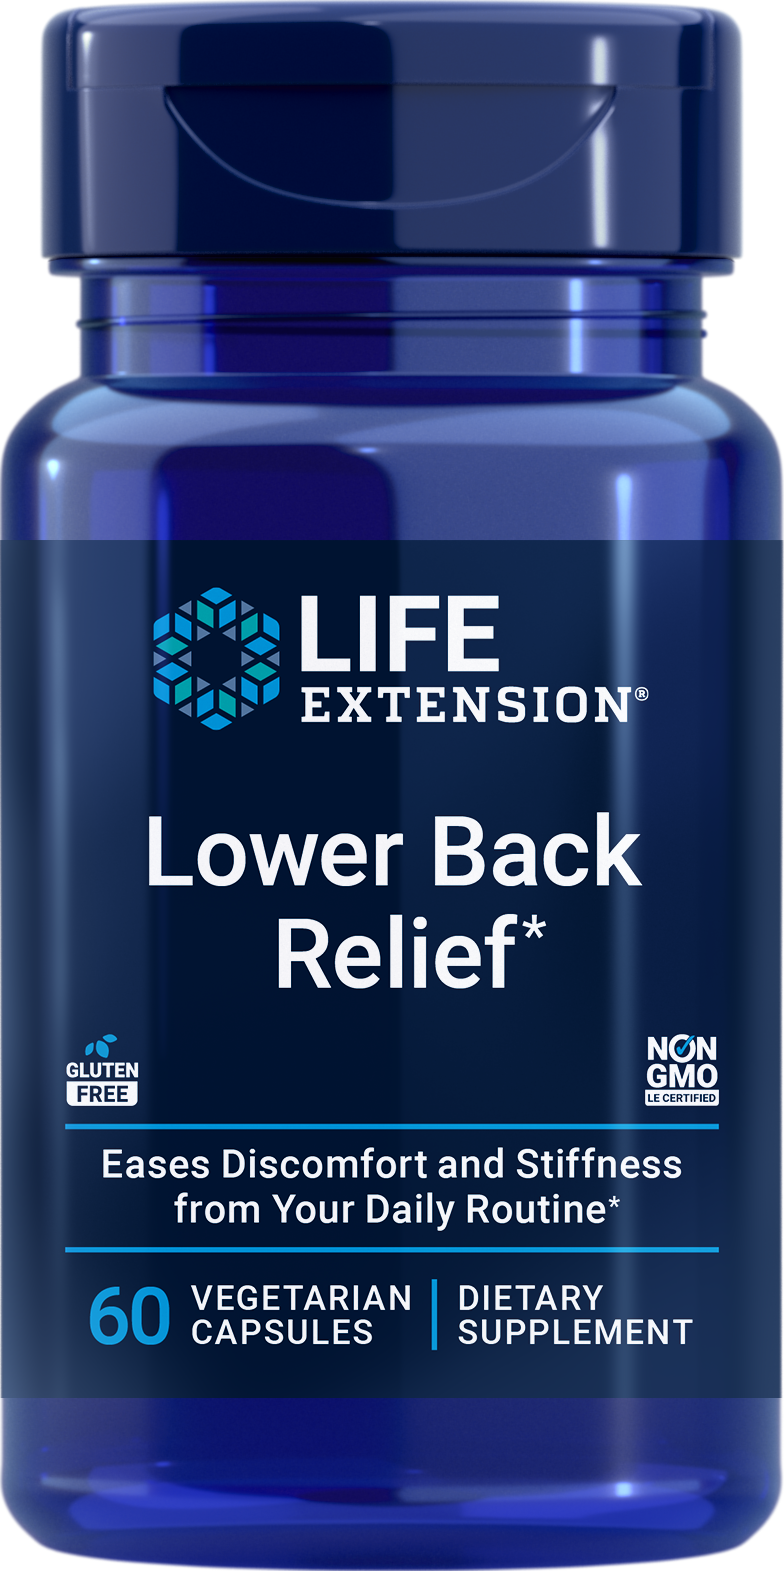 Life Extension’s new Lower Back Relief supplement nonGMO Gluten Free